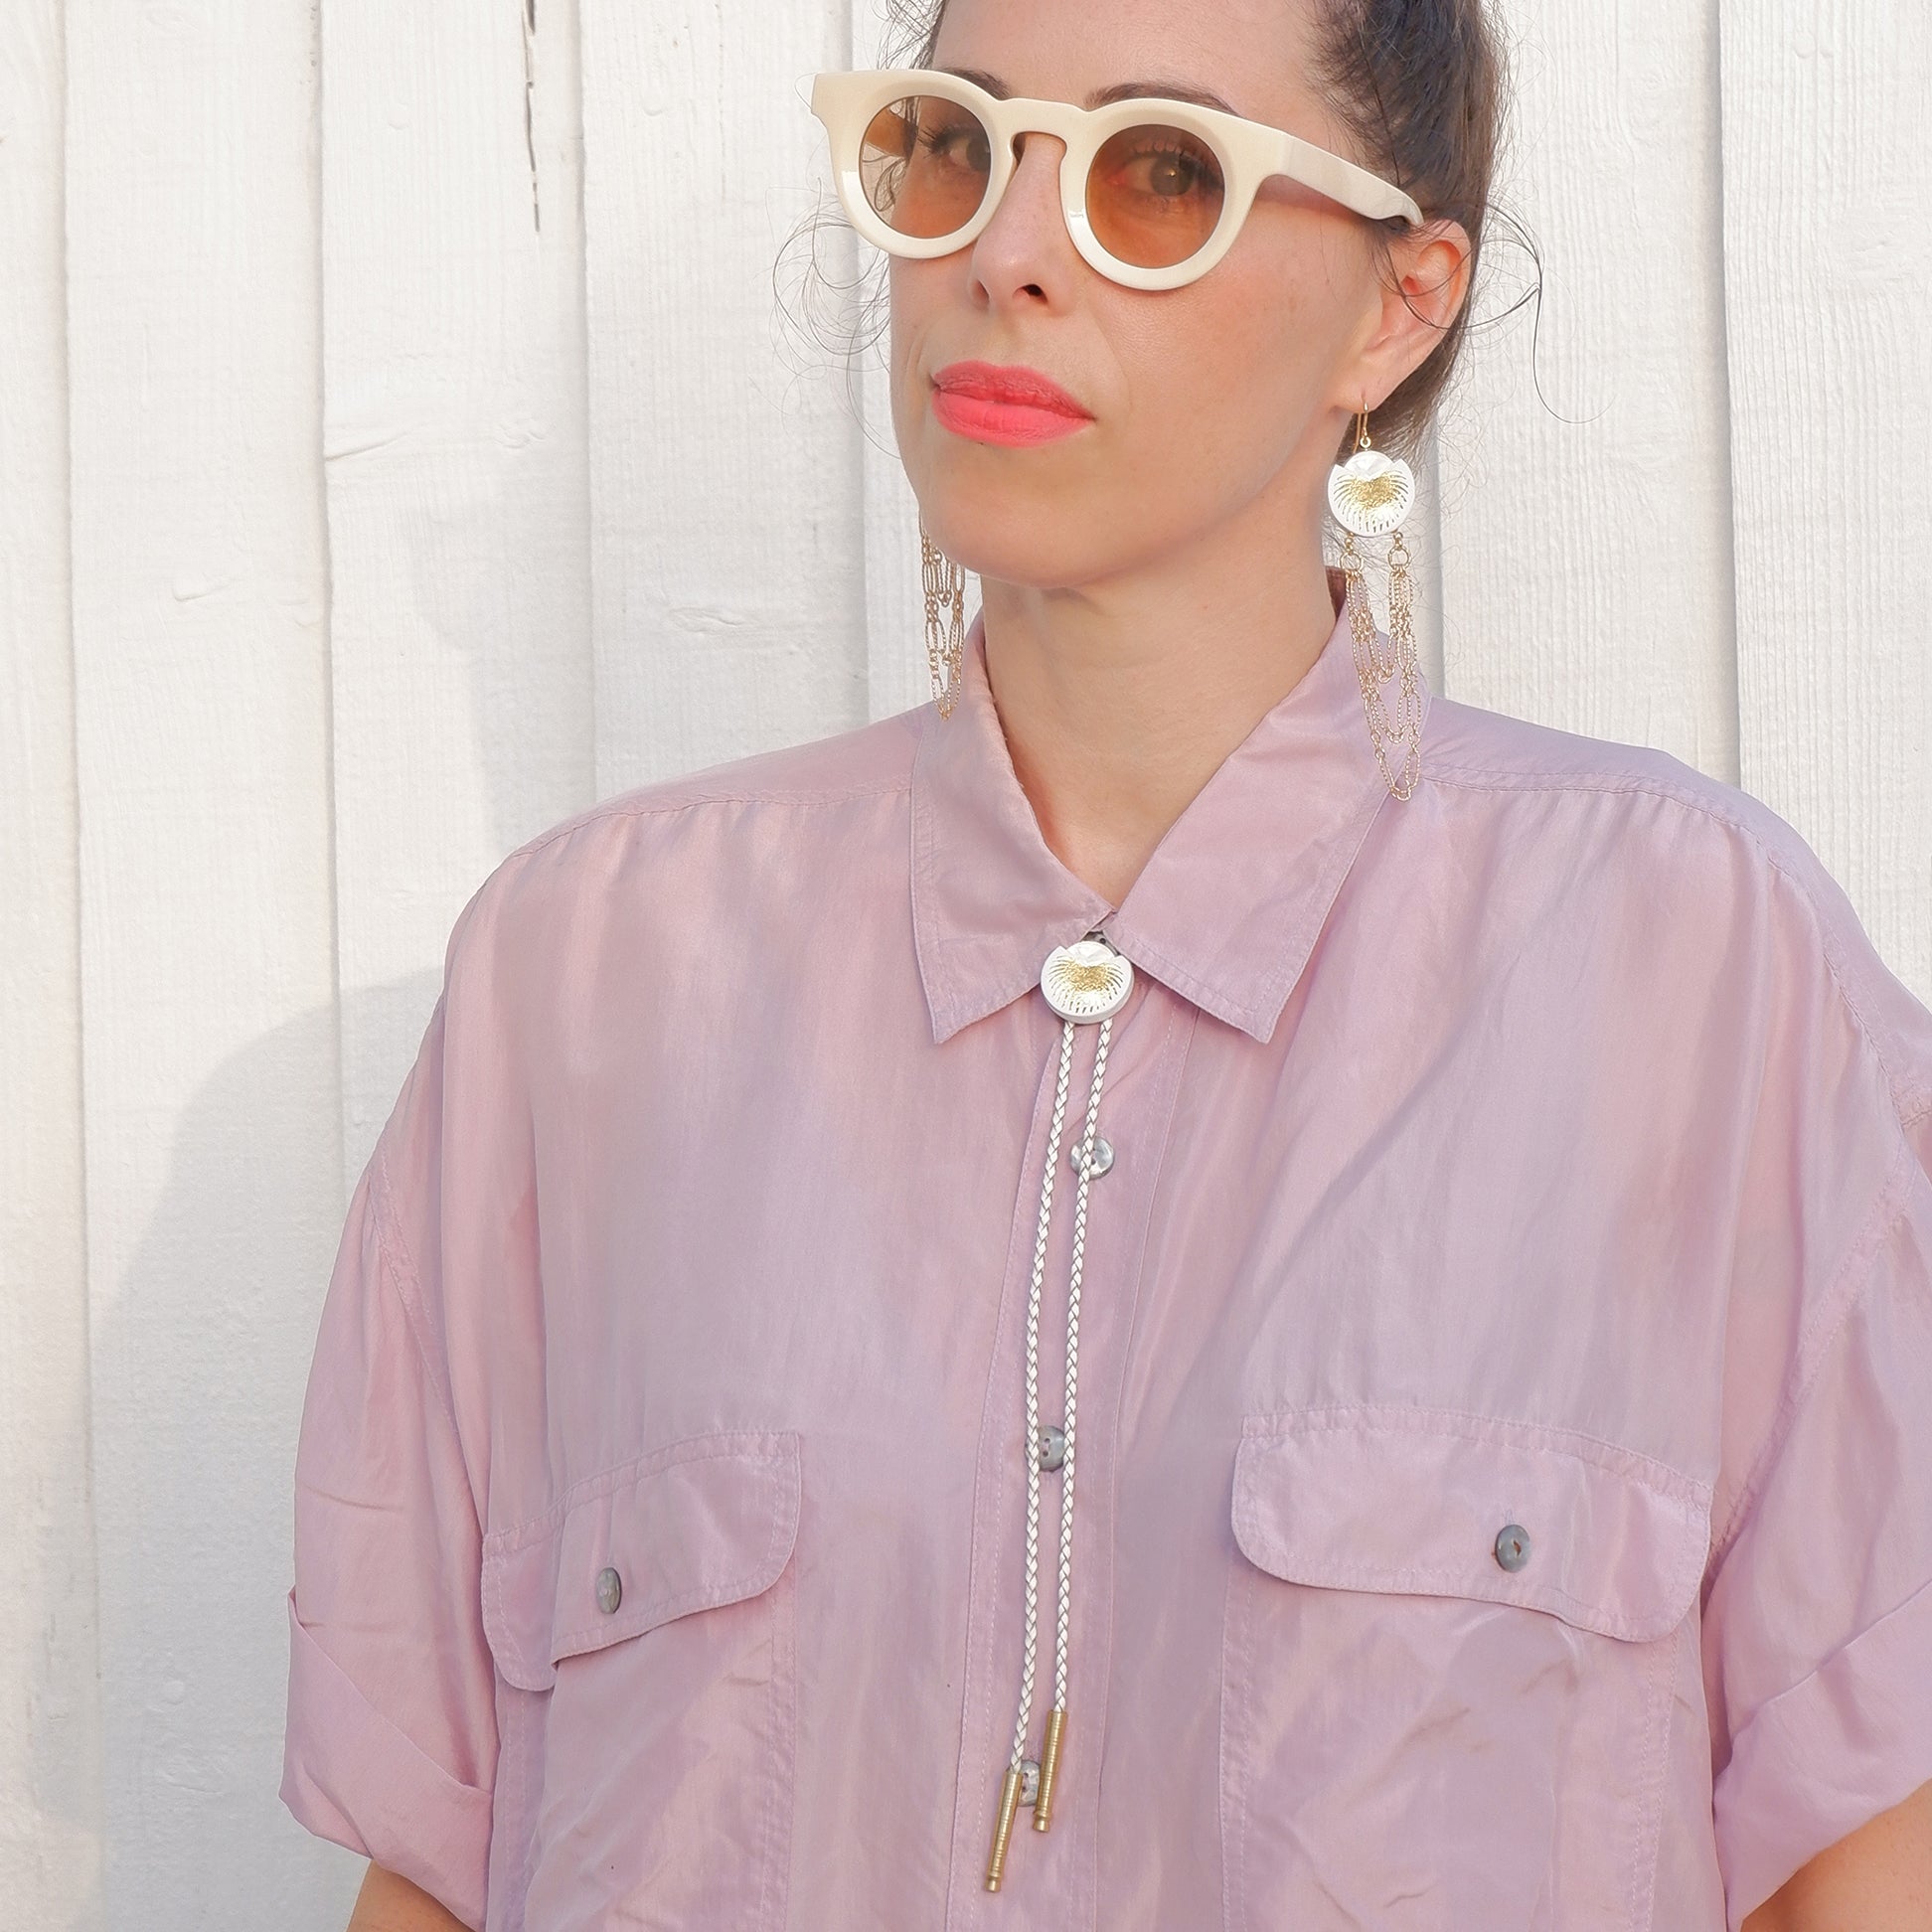 White leather bolo tie with gold palm print, mother of pearl accent & brass tips, on model in lilac shirt